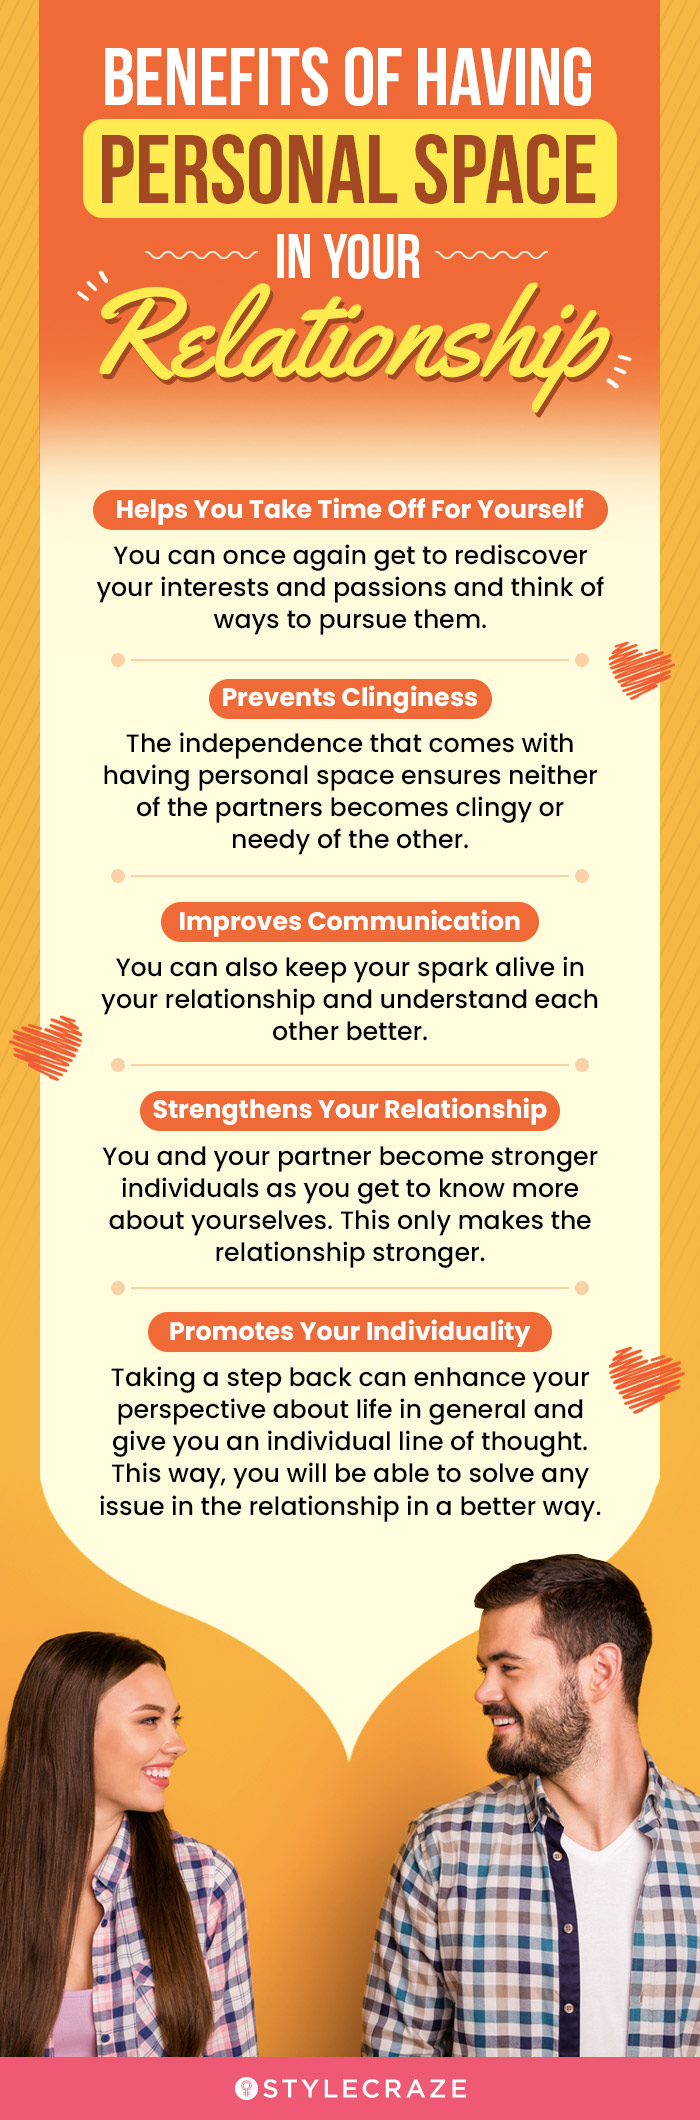 benefits of having personal space in your relationship (infographic)